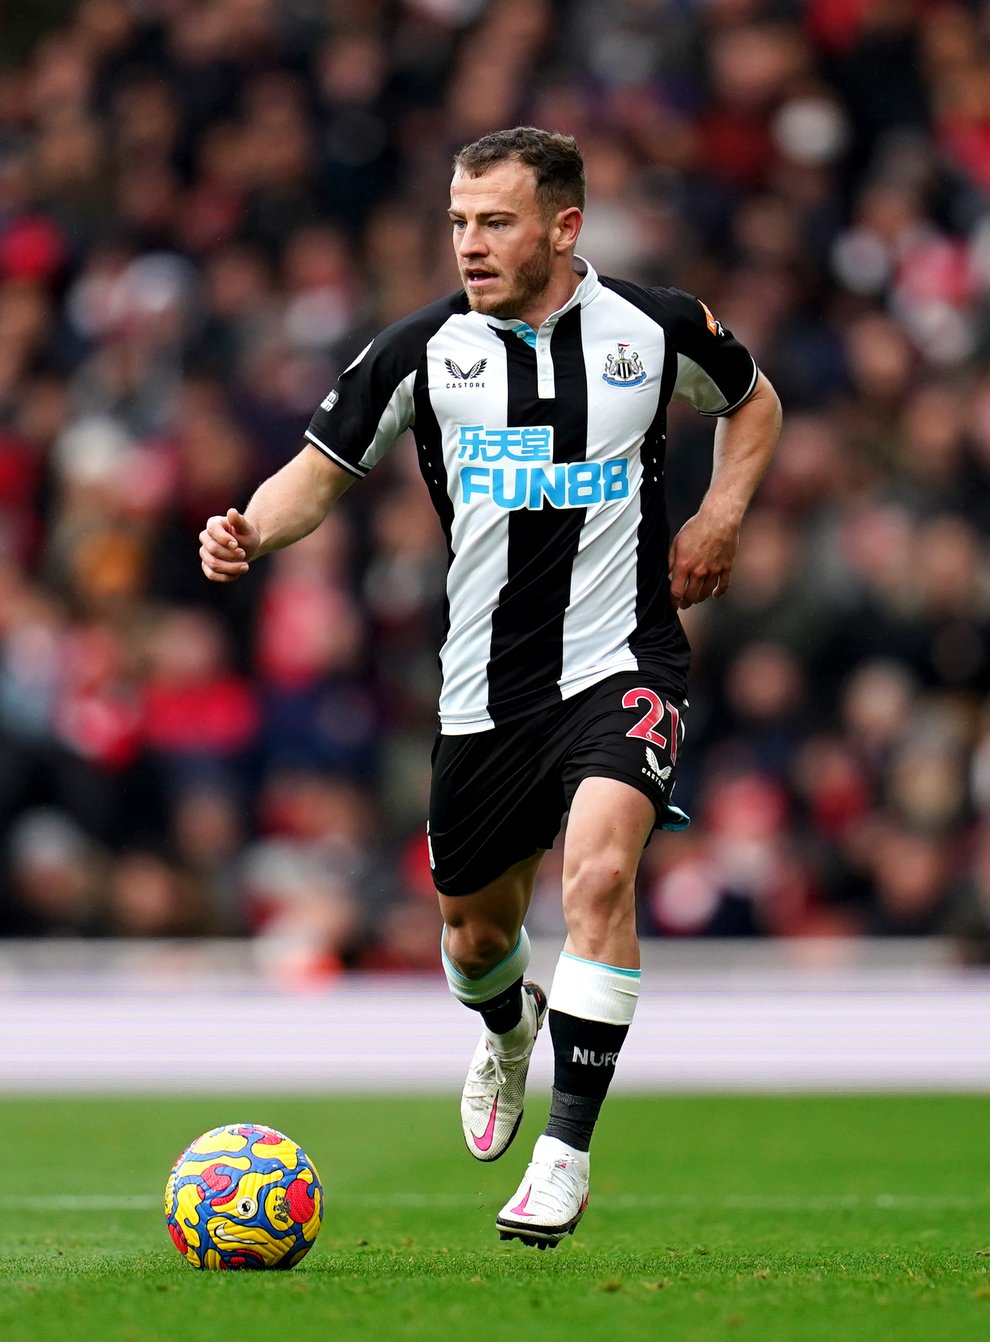 Ryan Fraser could return to the Newcastle squad after injury for Monday’s Premier League clash with Arsenal (John Walton/PA)